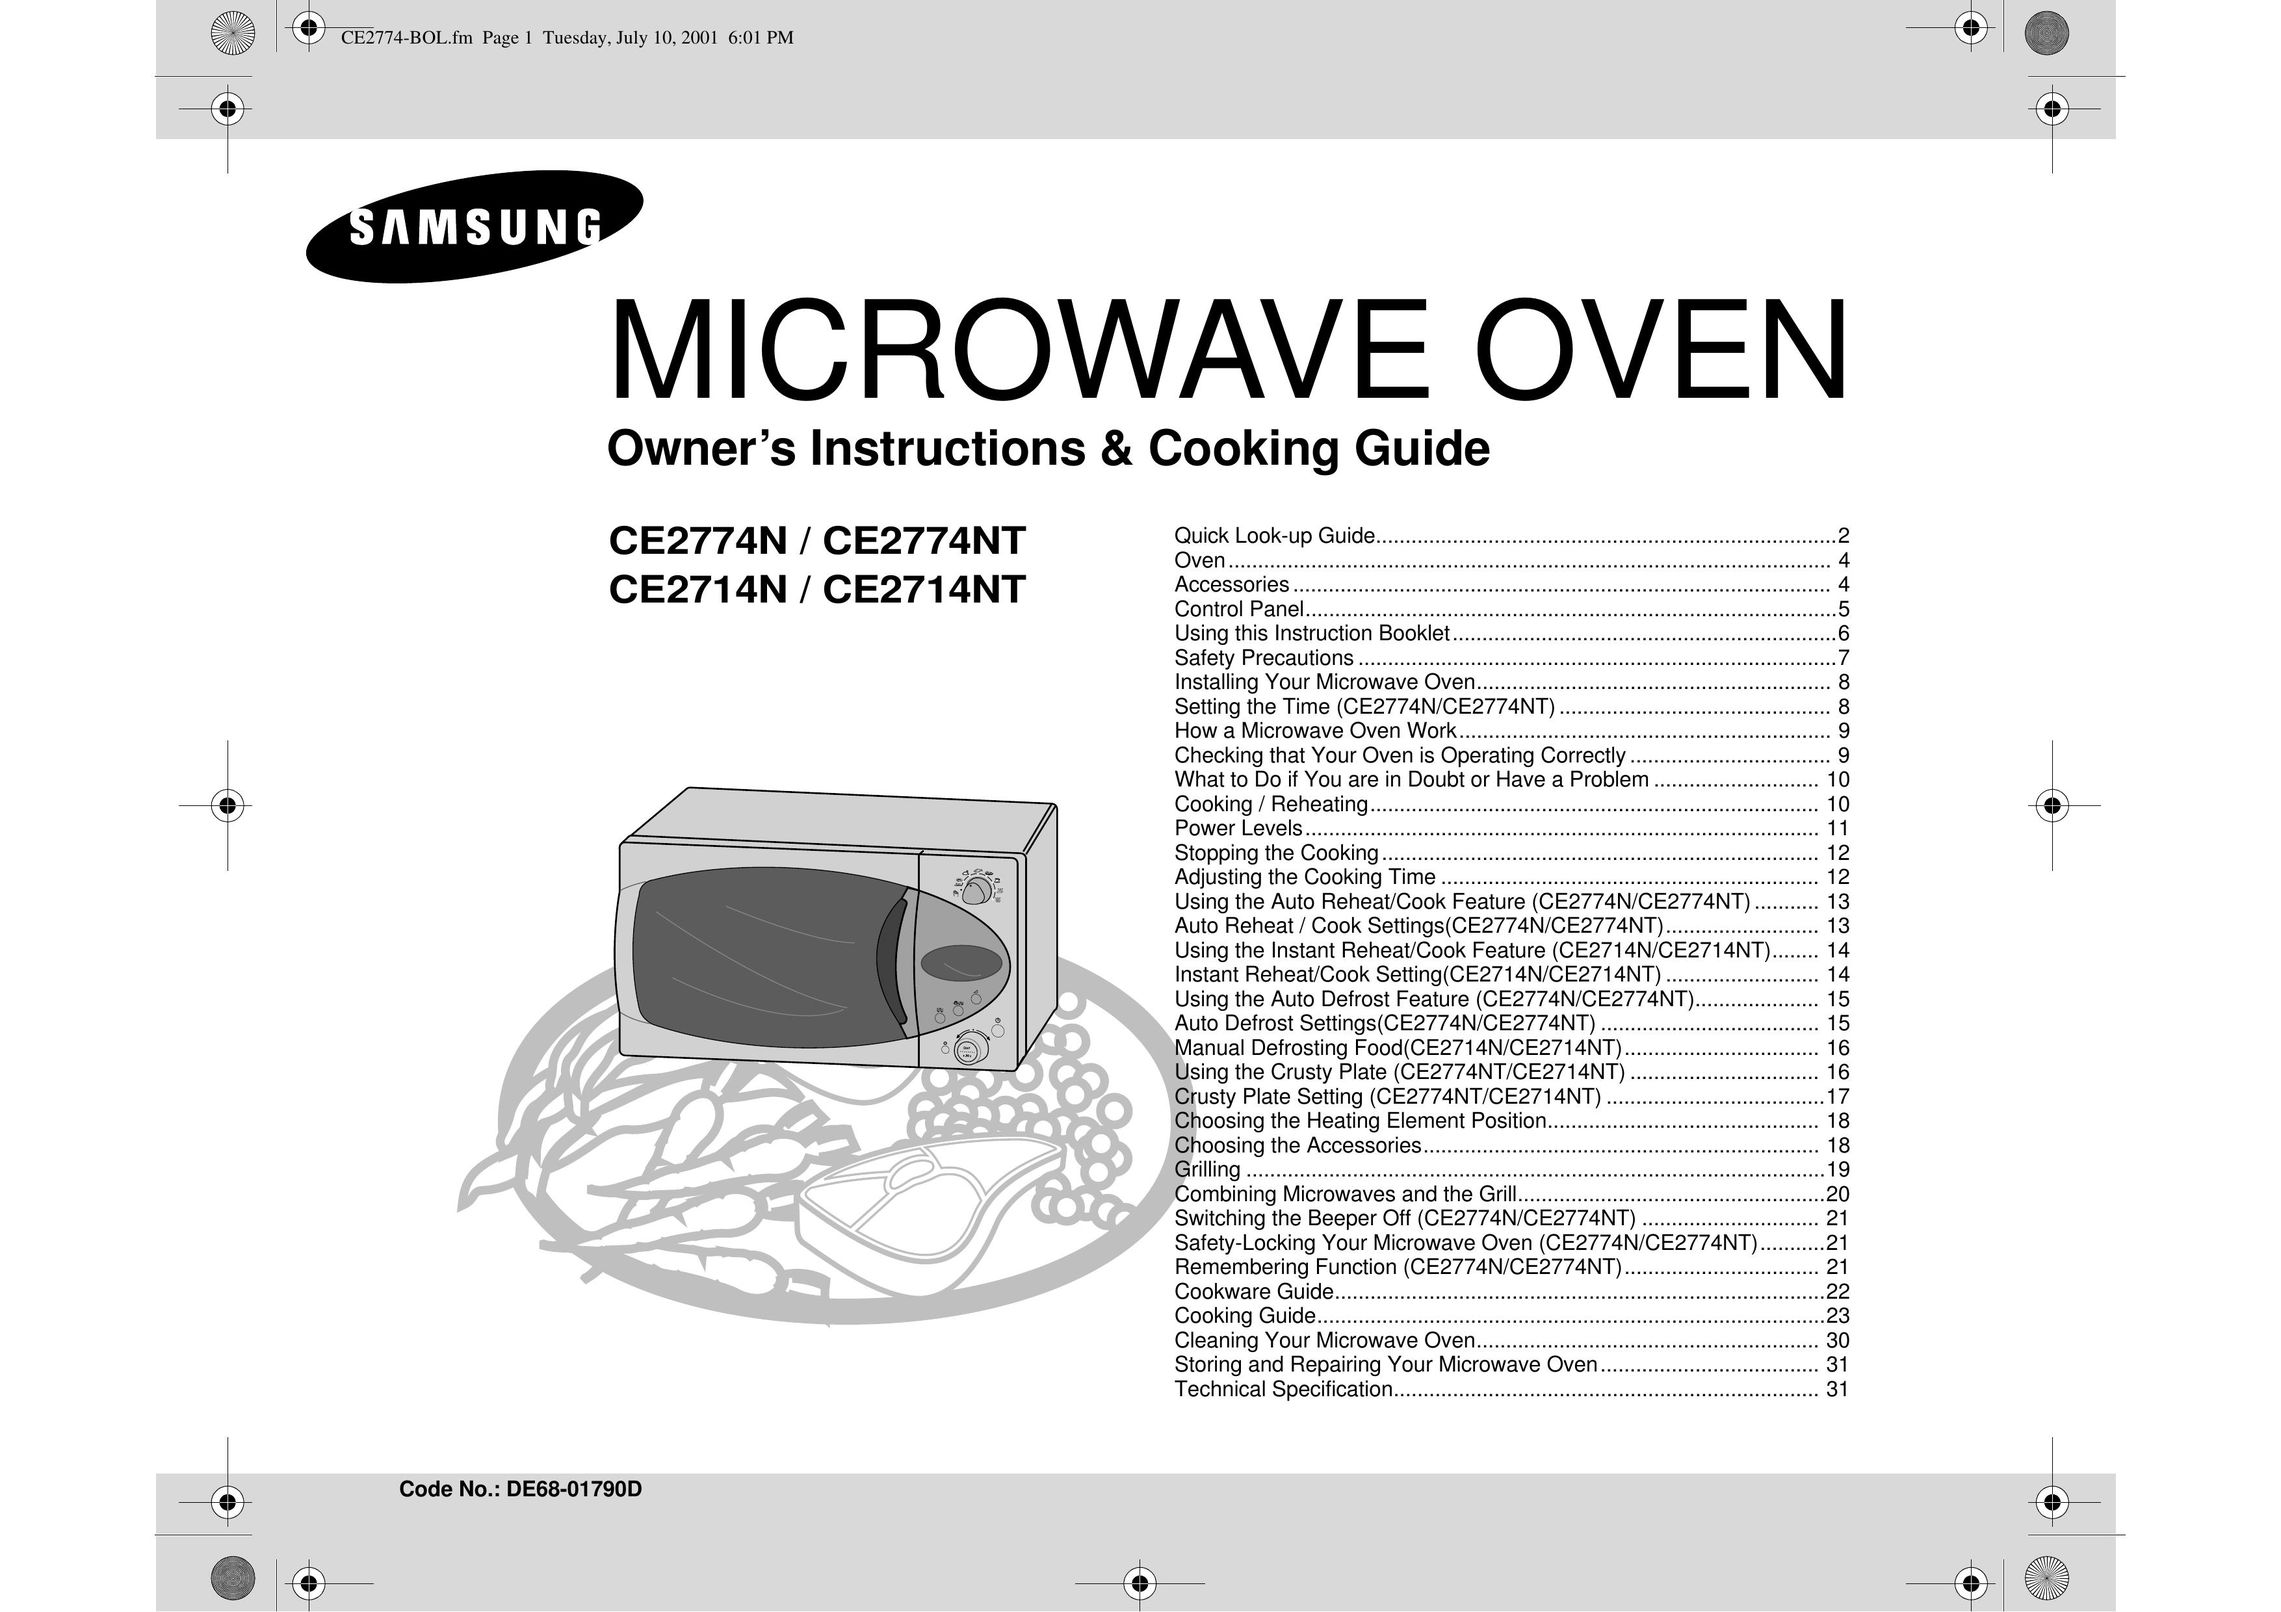 Samsung CE2714N Microwave Oven User Manual